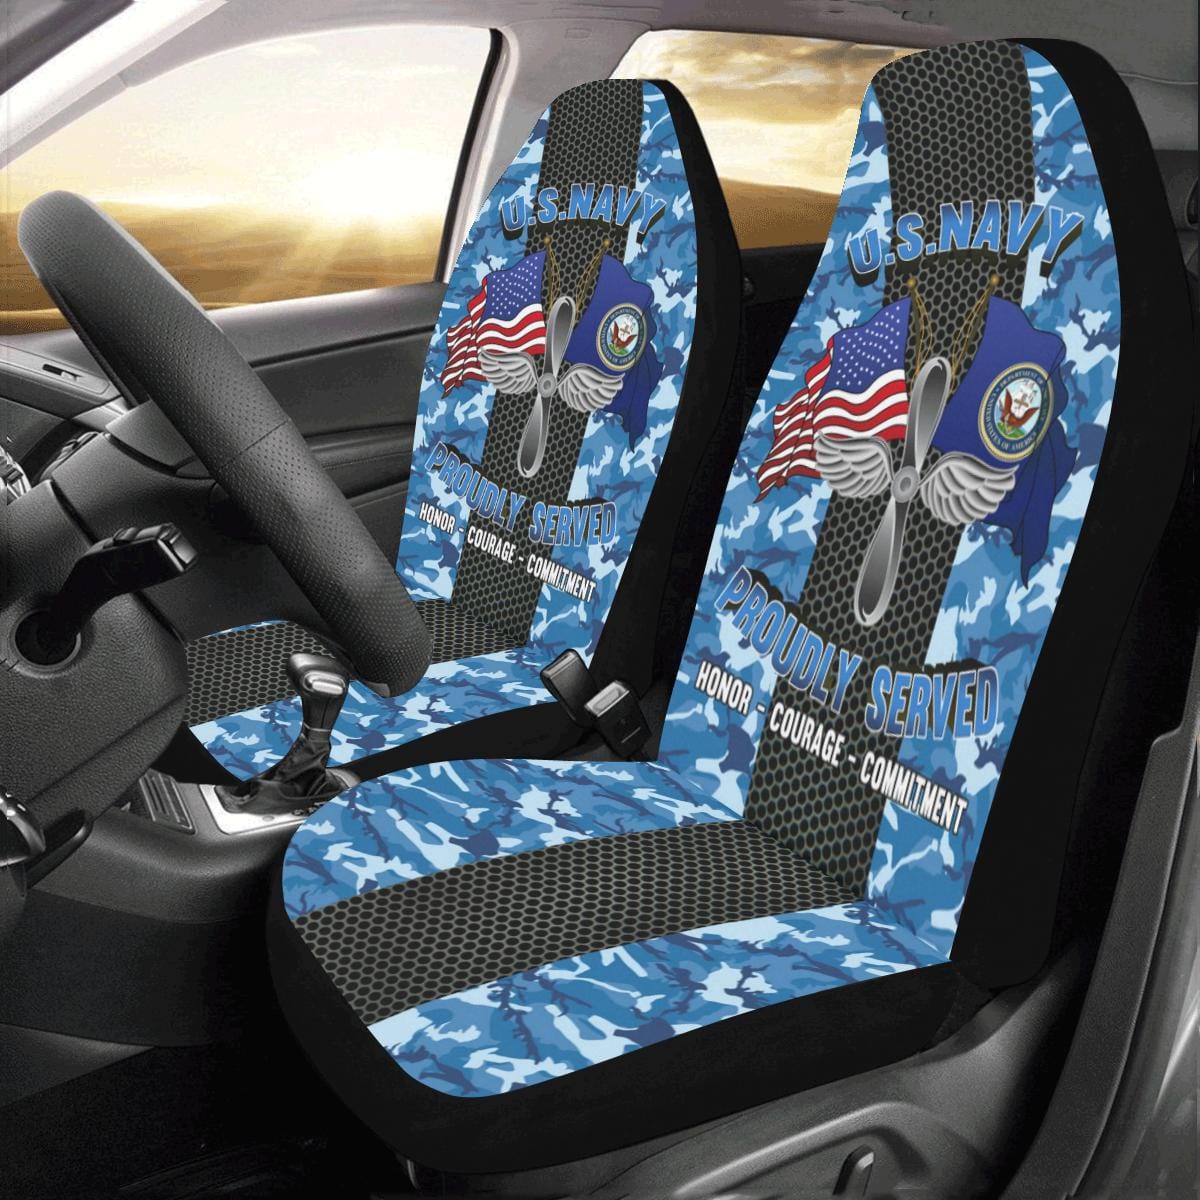 U.S Navy Aviation machinist's mate Navy AD Car Seat Covers (Set of 2)-SeatCovers-Navy-Rate-Veterans Nation